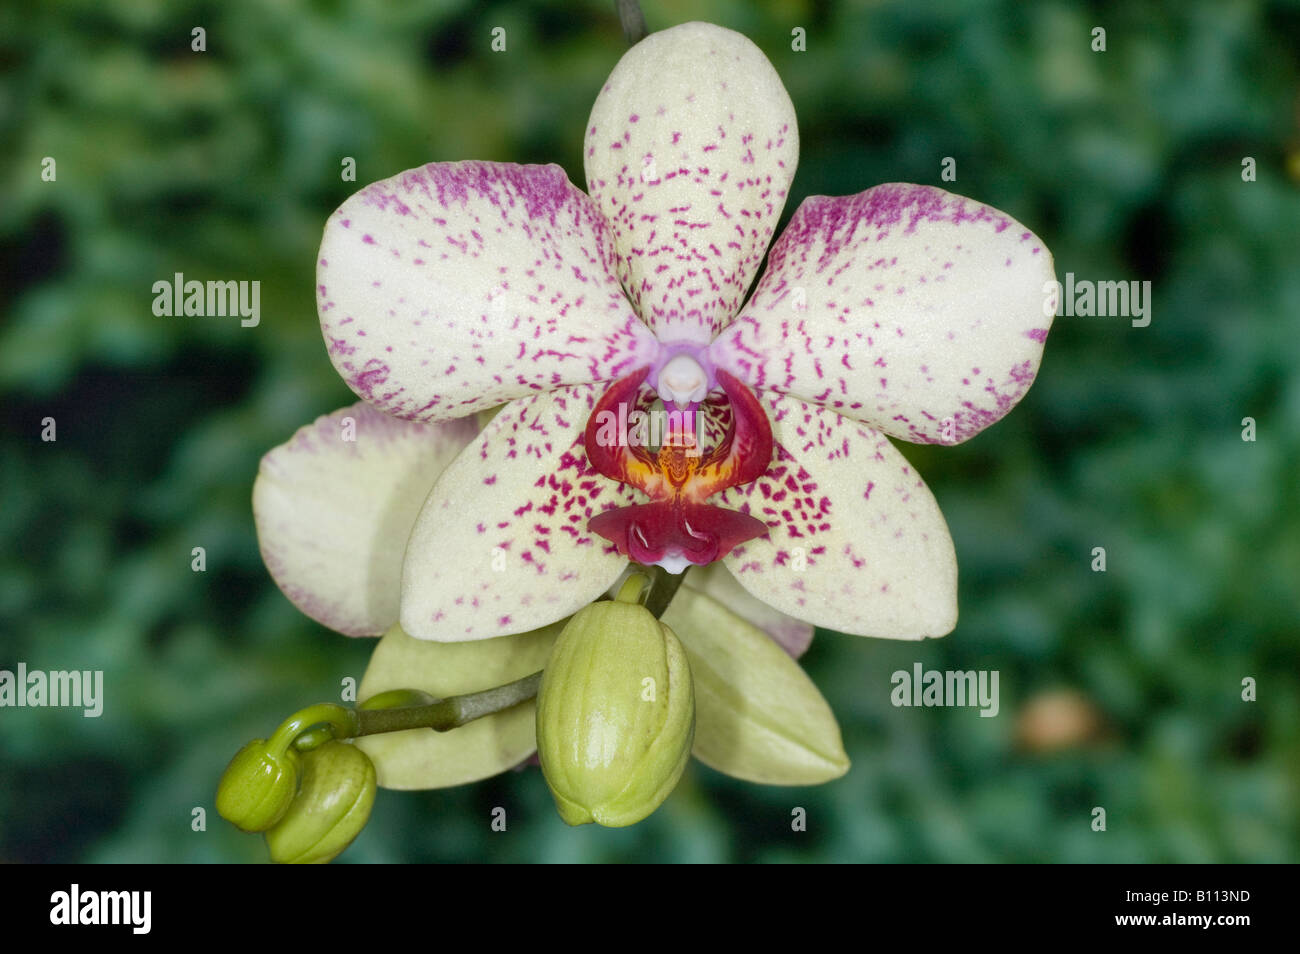 Strikingly coloured flower of a Phalaenopsis hybrid orchid Stock Photo